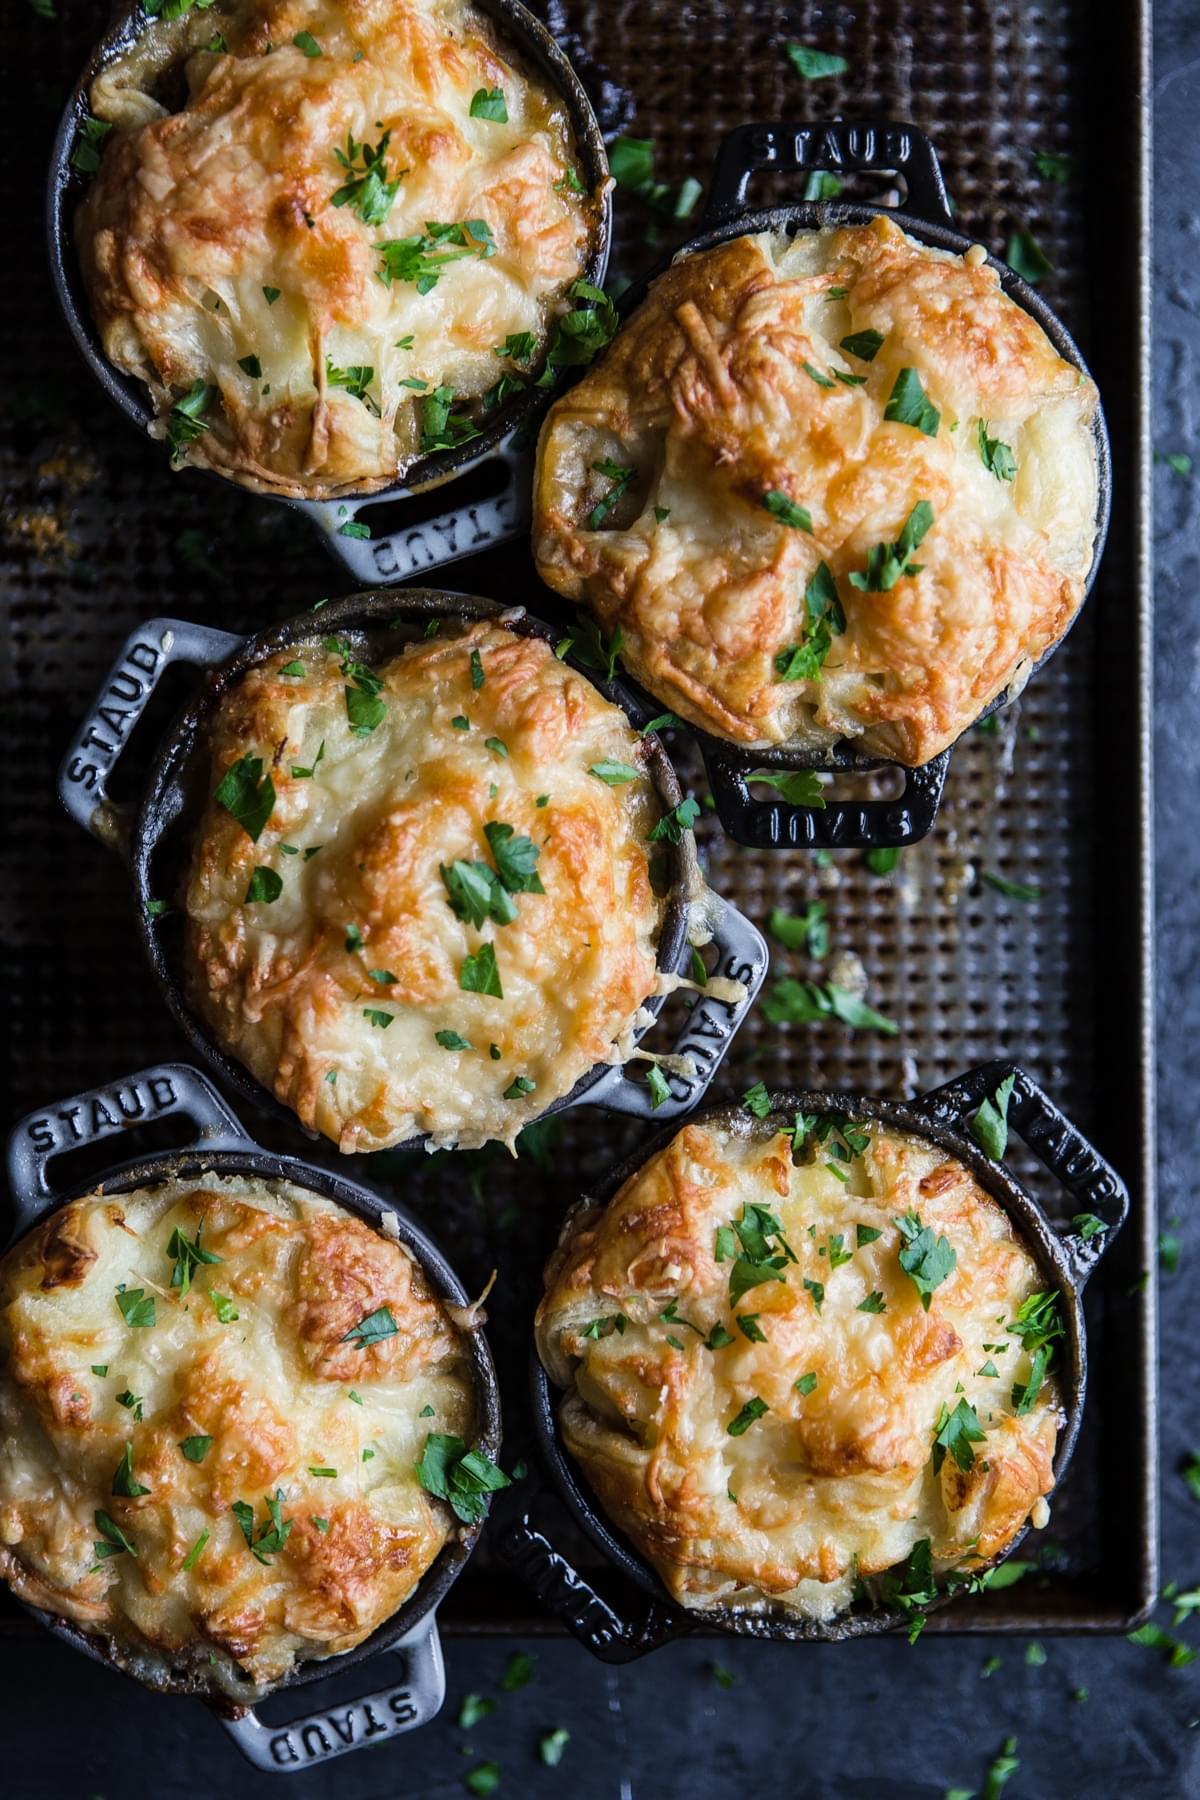 cocettes with llamb shepherd's pie with puff pastry and mashed potatoes sprinkled with gruyere cheese  with parsley